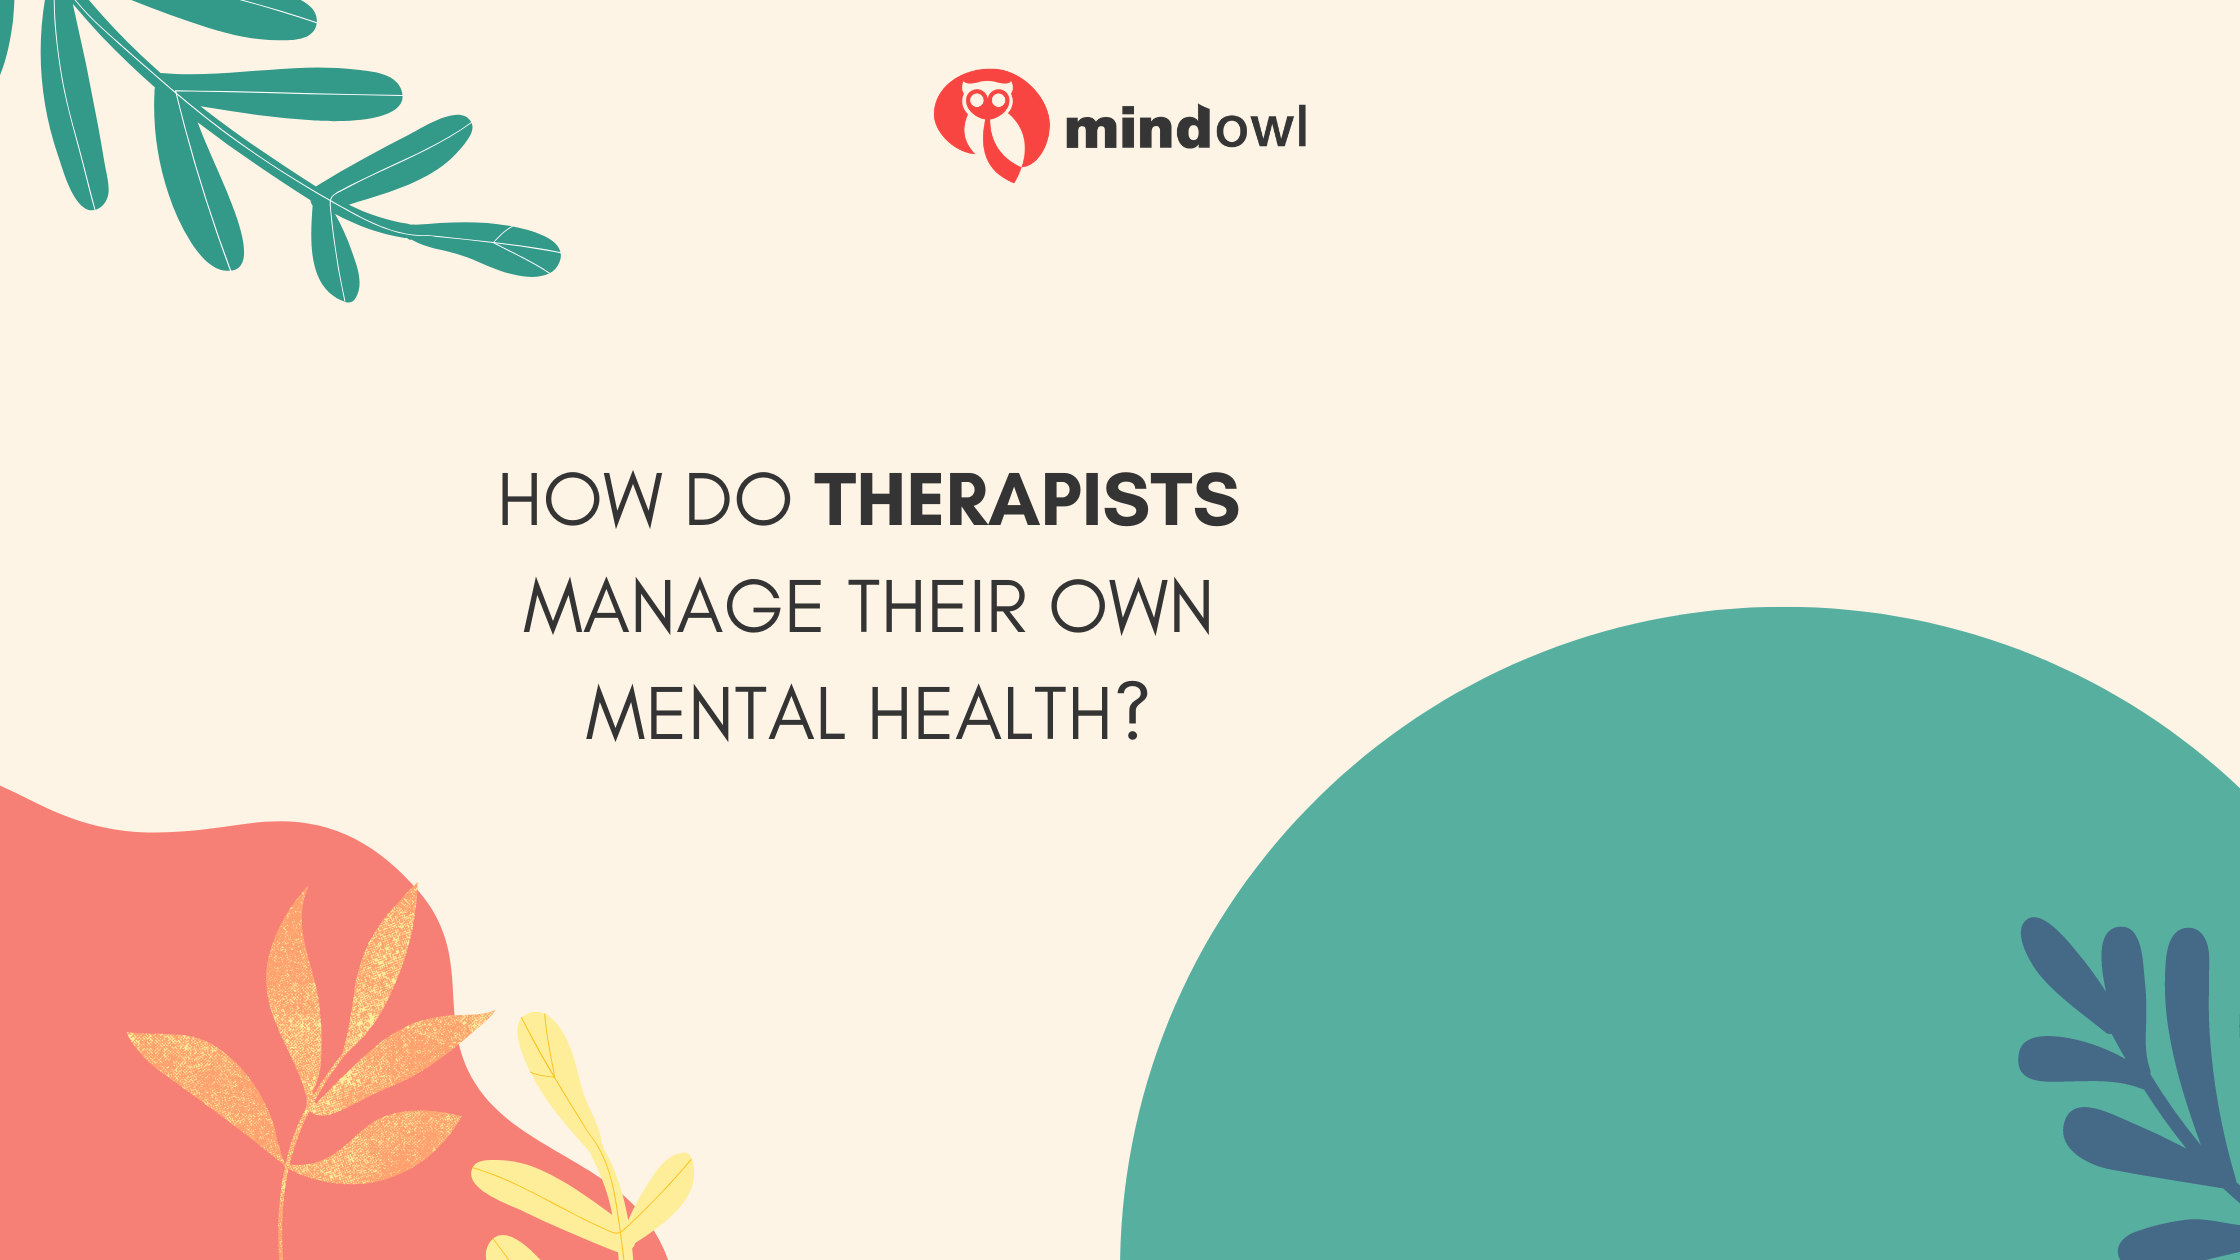 How Do Therapists Manage Their Own Mental Health?